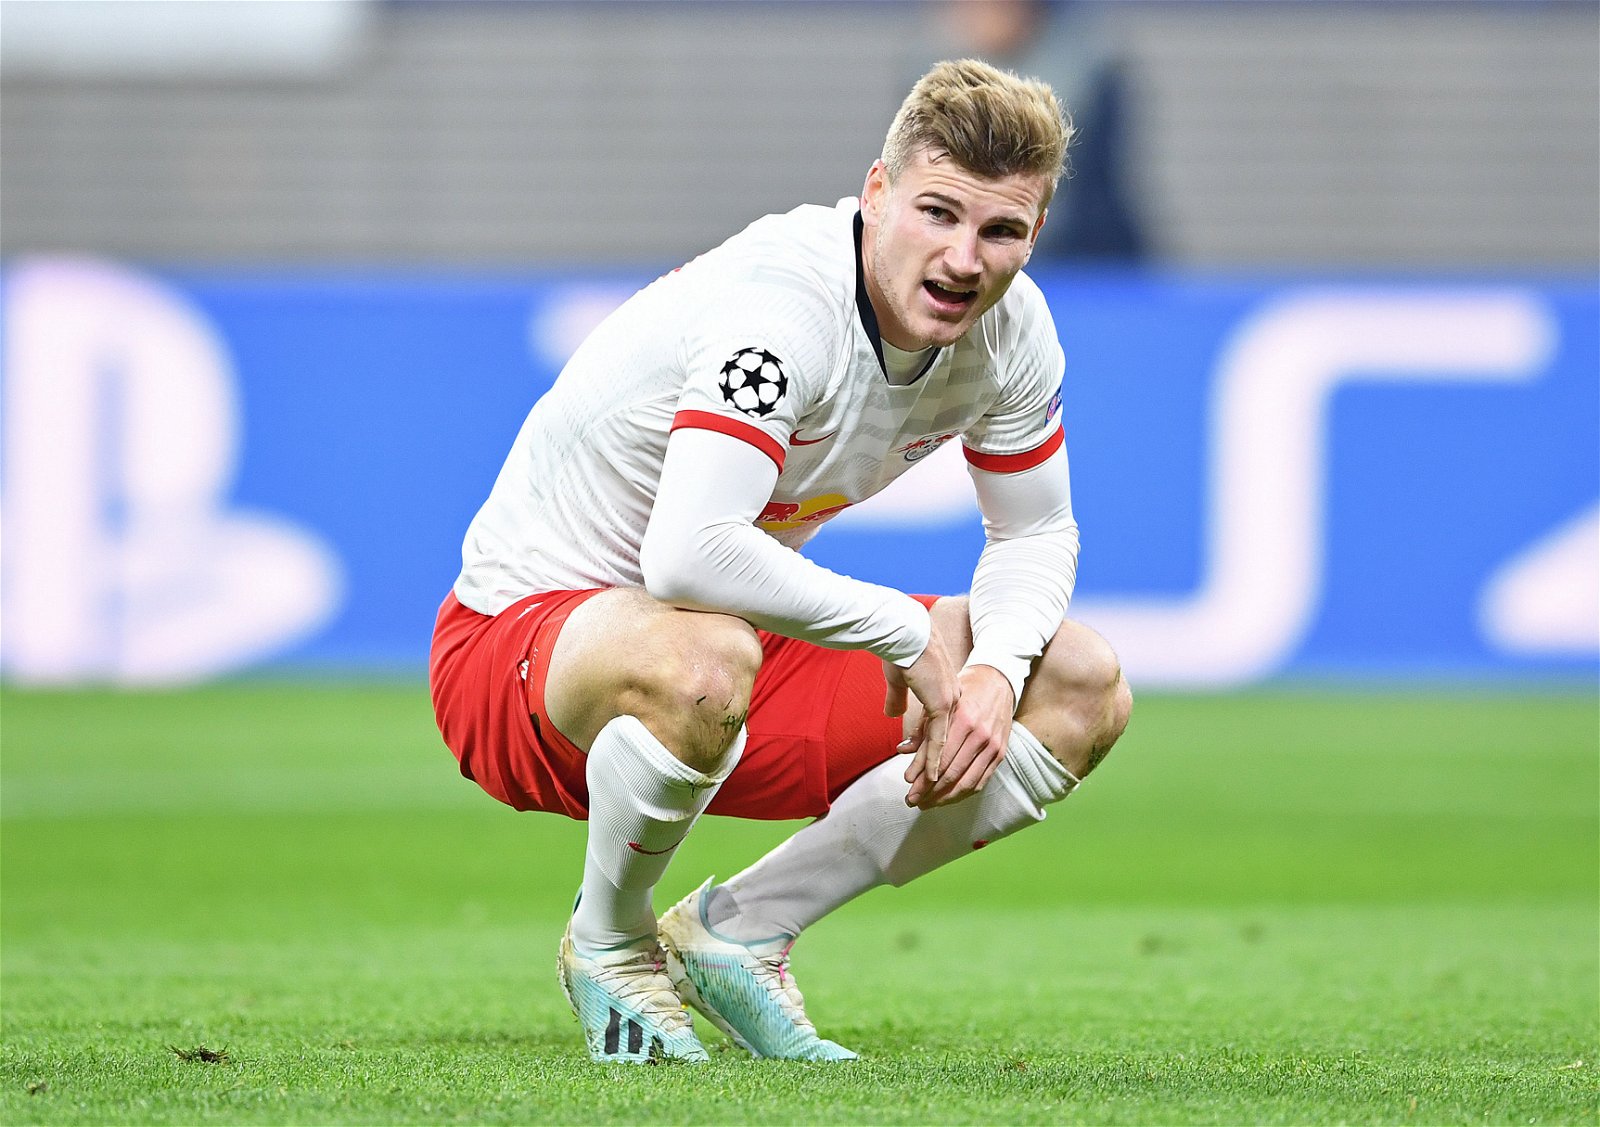 Manchester United linked with surprise move for Leipzig striker Timo Werner